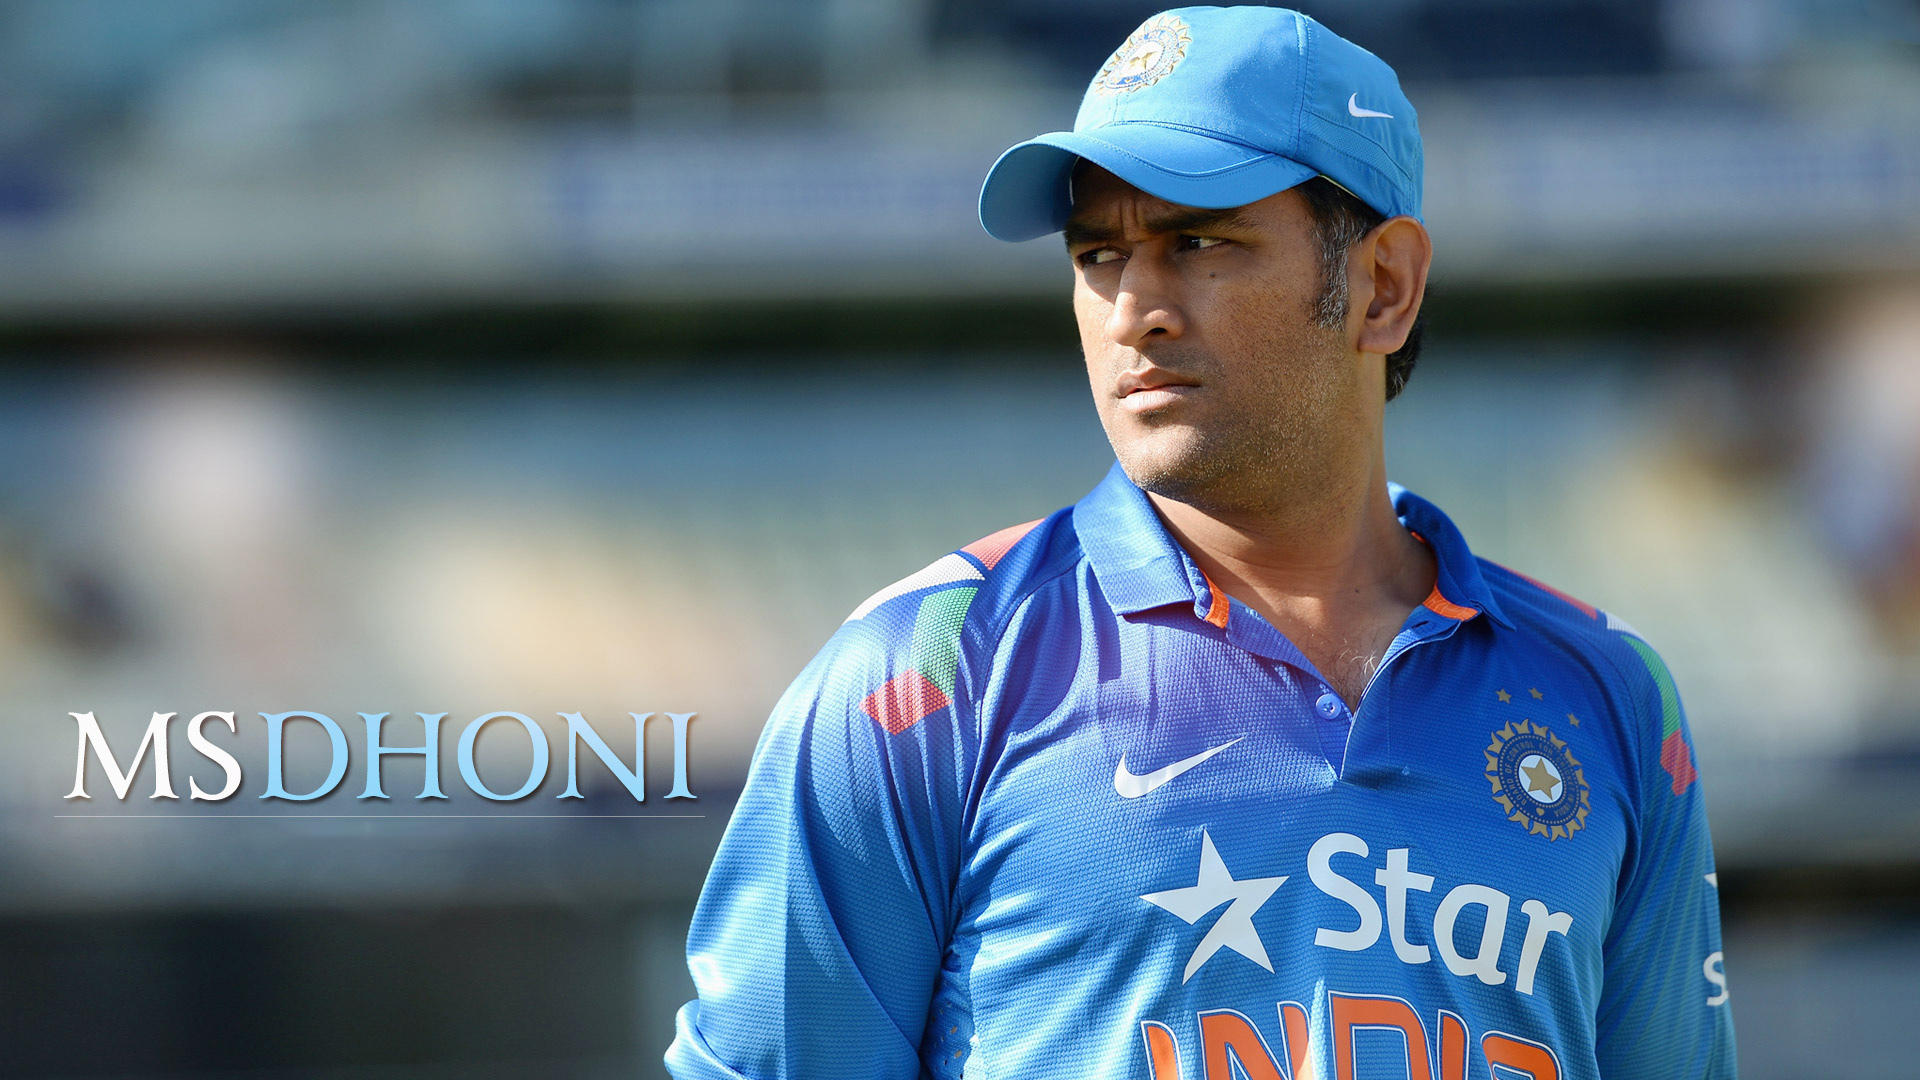 Ms Dhoni Cute Pictures